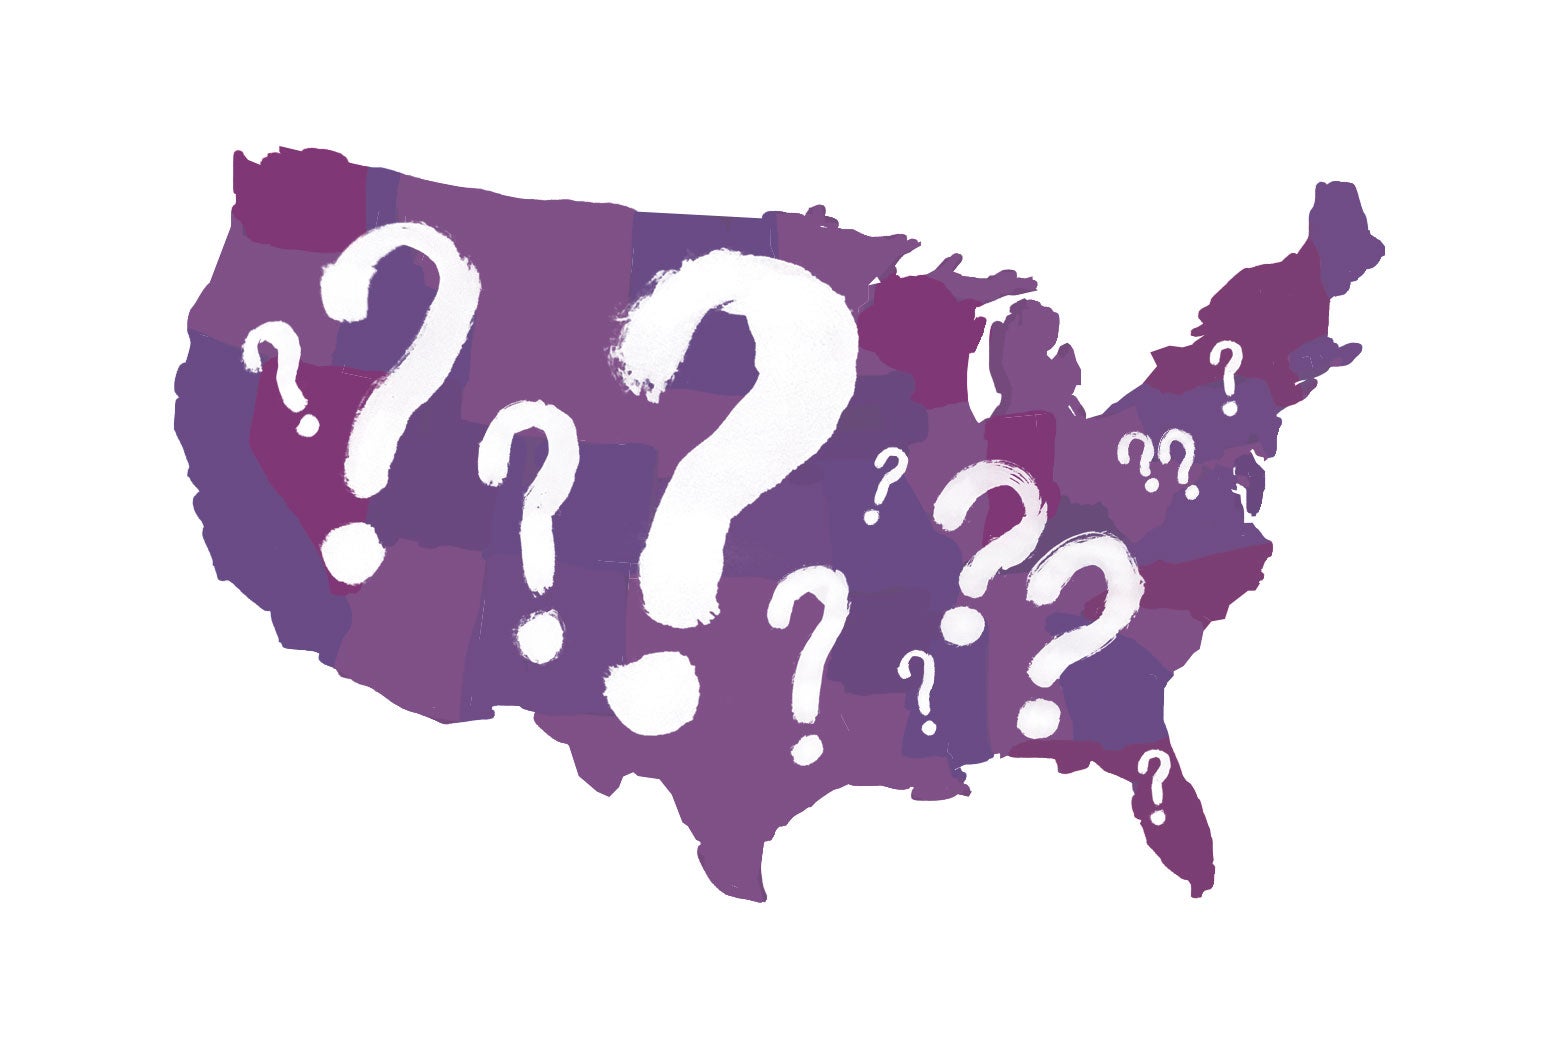 U.S. map colored in purple and covered in question marks.